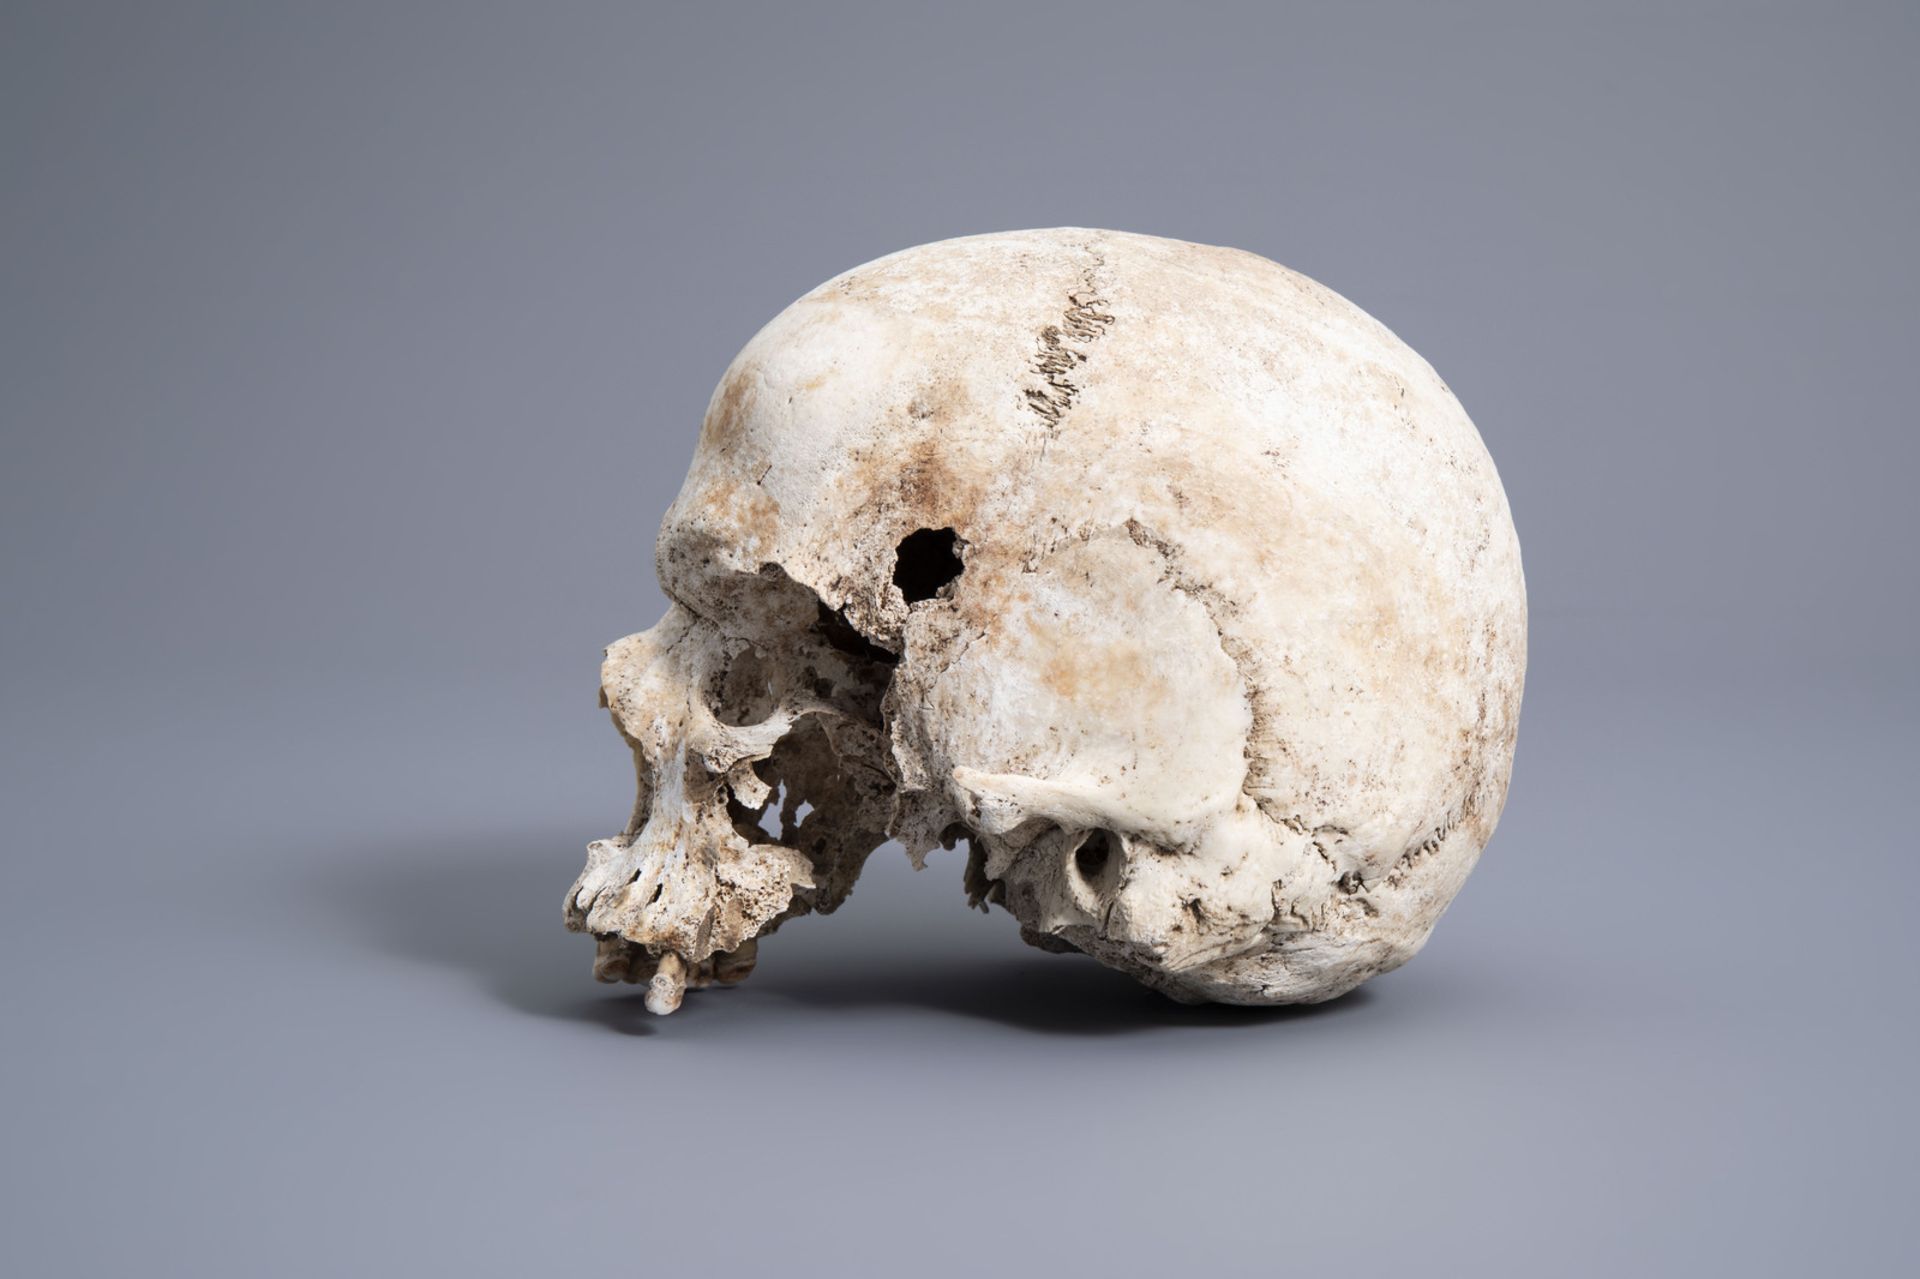 A human skull from an excavated archeological context, 17th/18th C. - Image 4 of 6